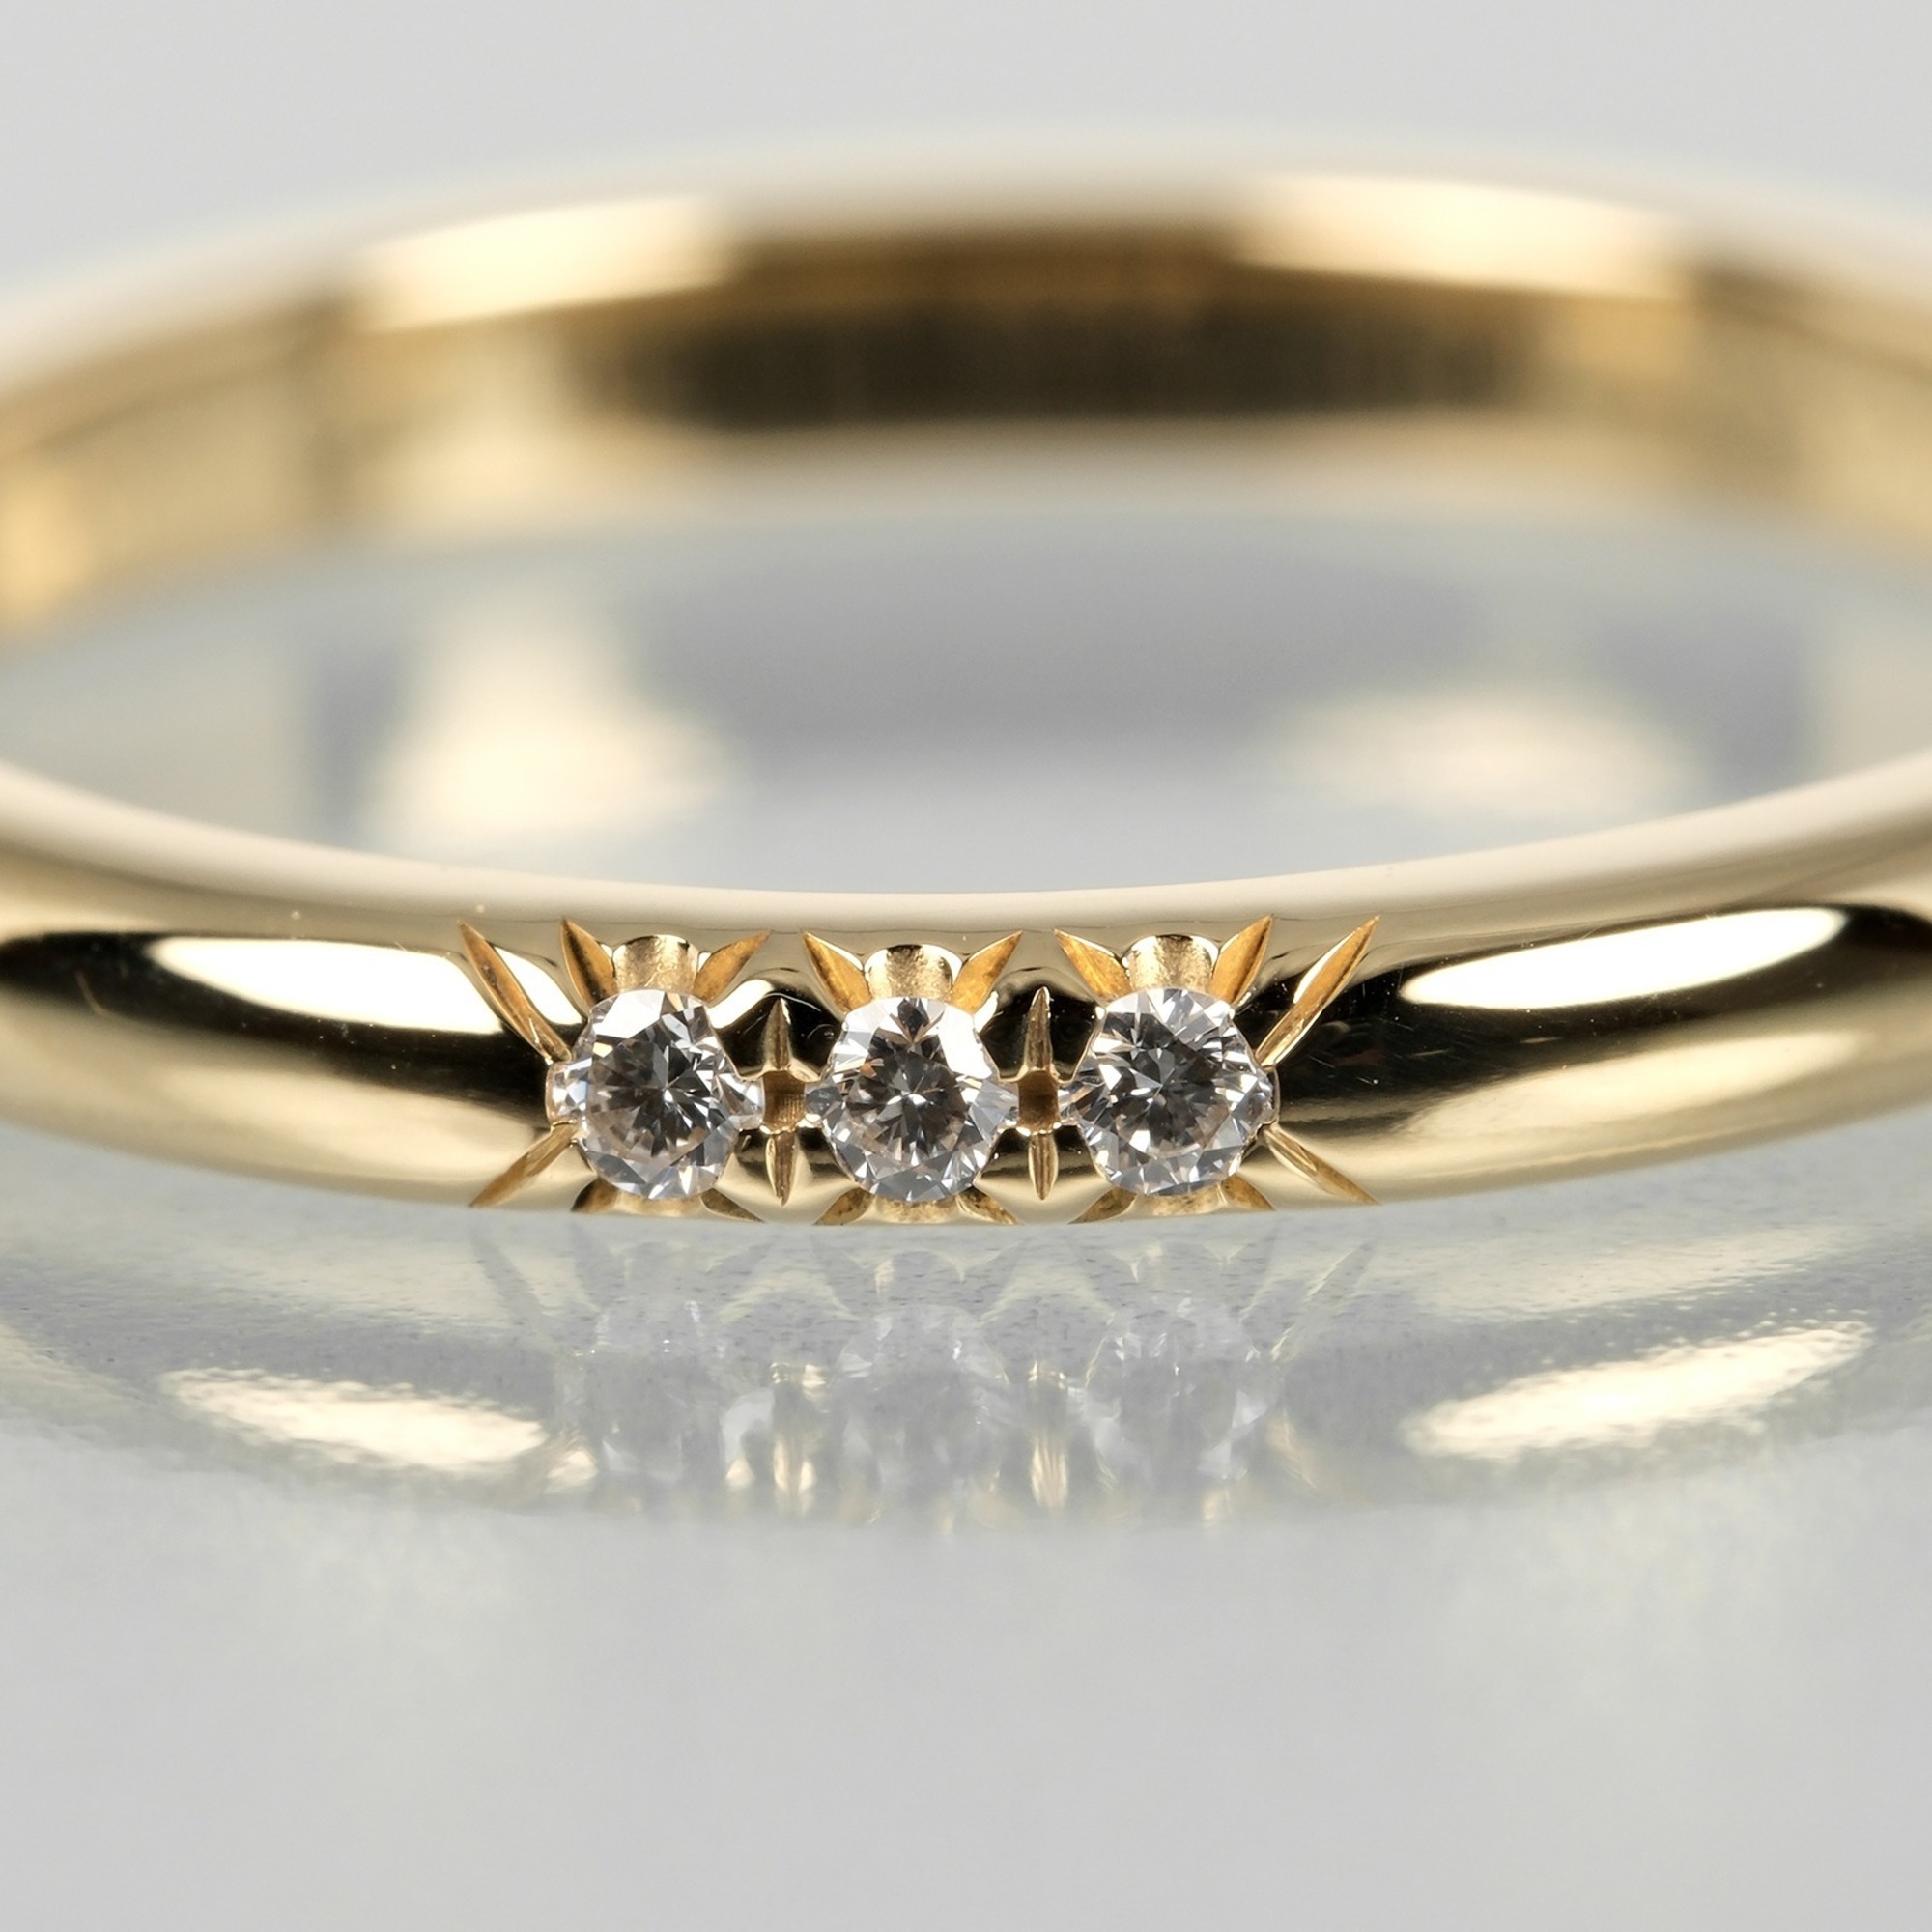 Tiffany Forever Classic Band Size 6.5 Ring, K18YG Yellow Gold, 3P Diamond, Approx. 2.34g